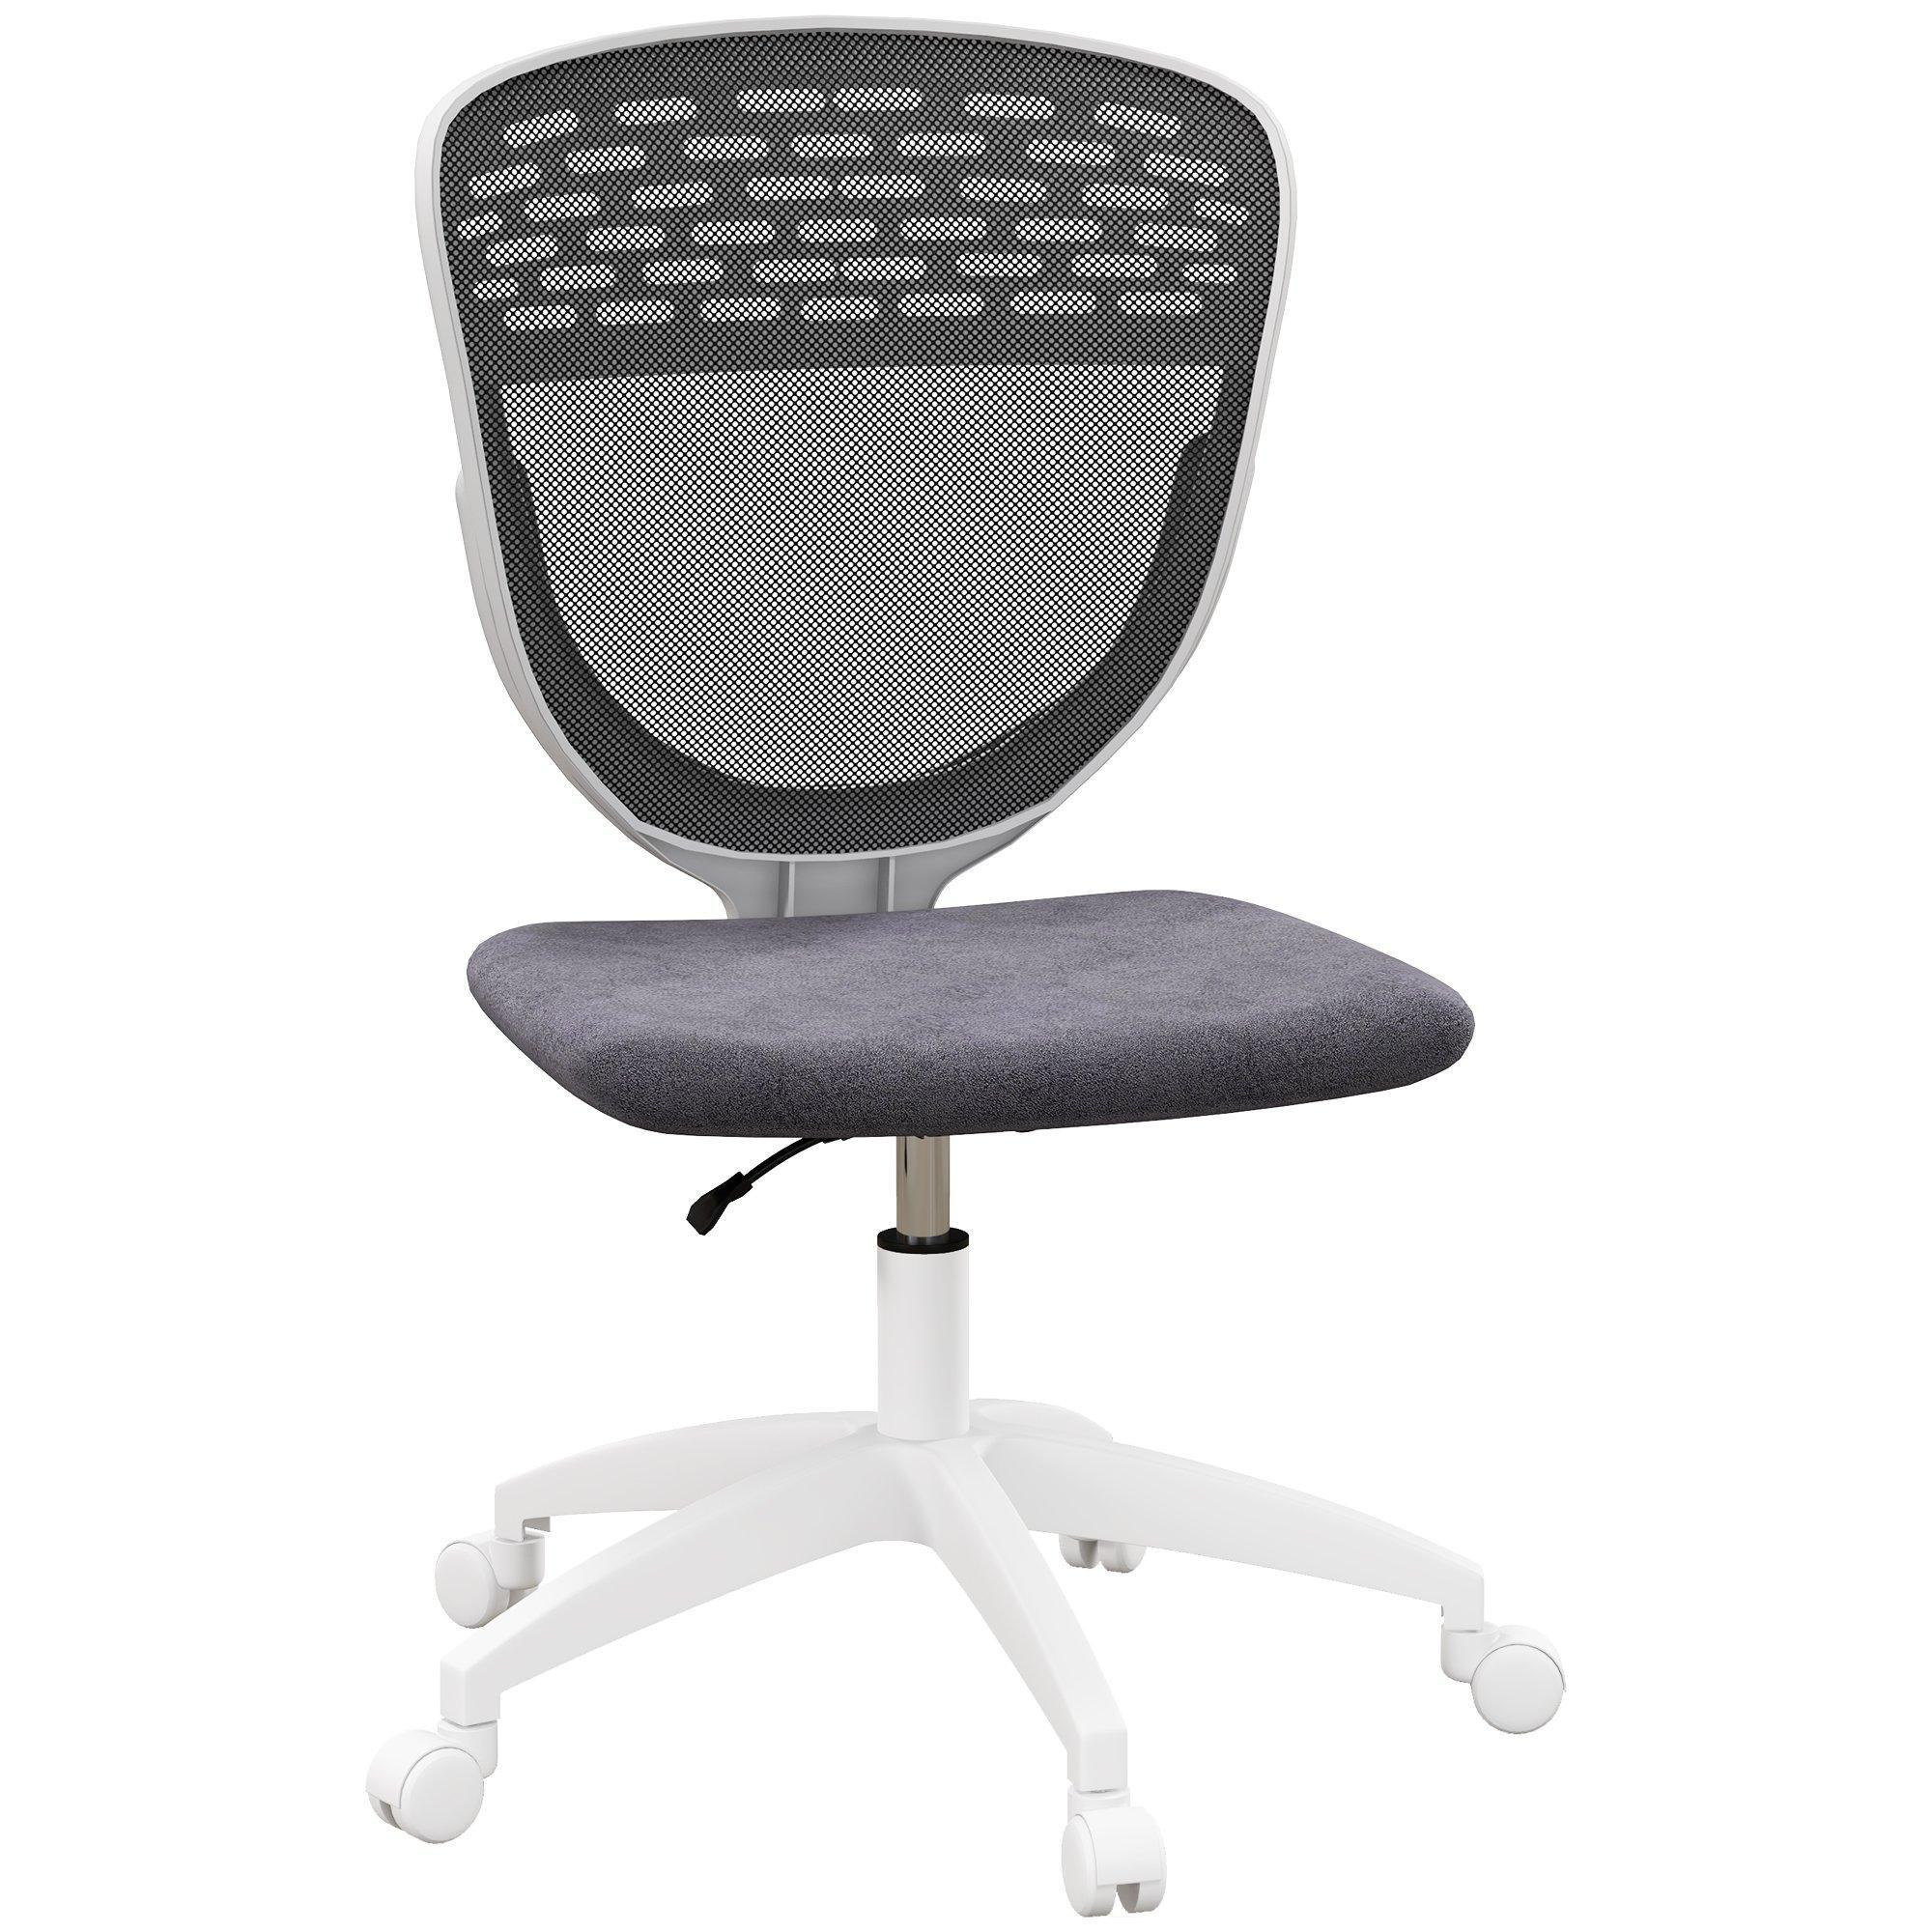 Armless Desk Chair Height Adjustable Office Chair with Swivel Wheels - image 1